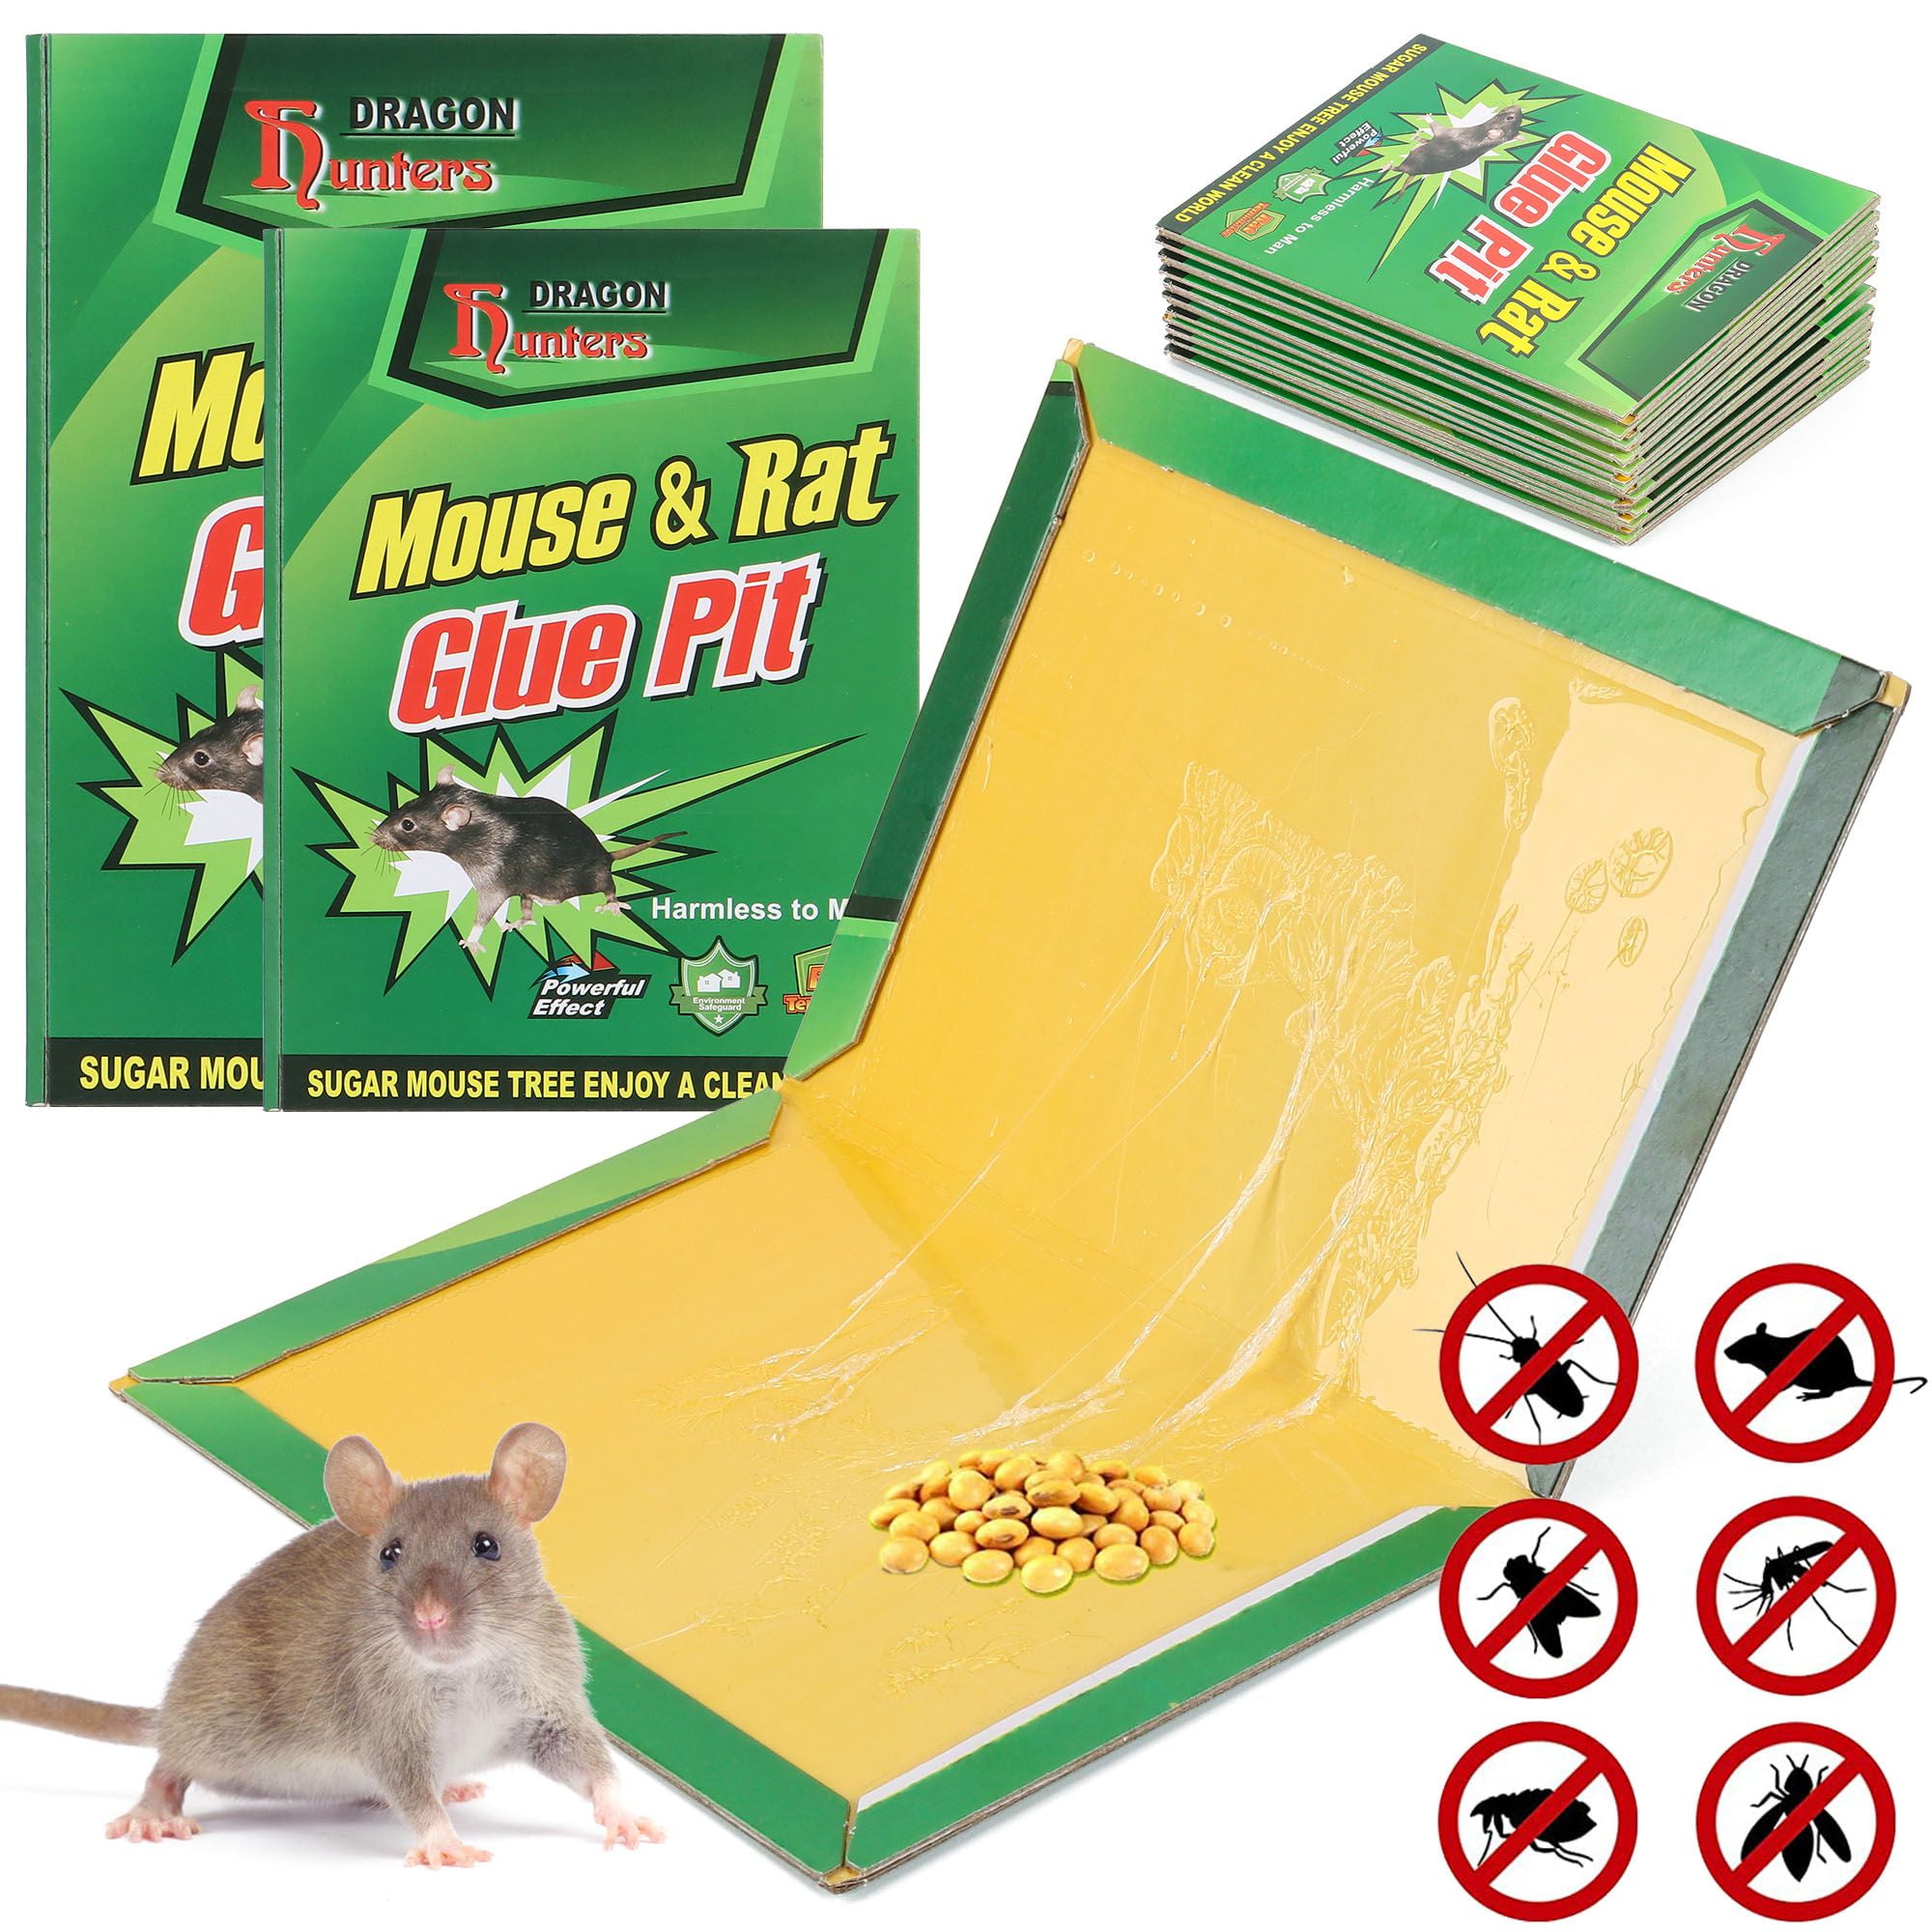 Heavy Duty Rat, Mouse, Snake & Insect Glue Trays 6 Count